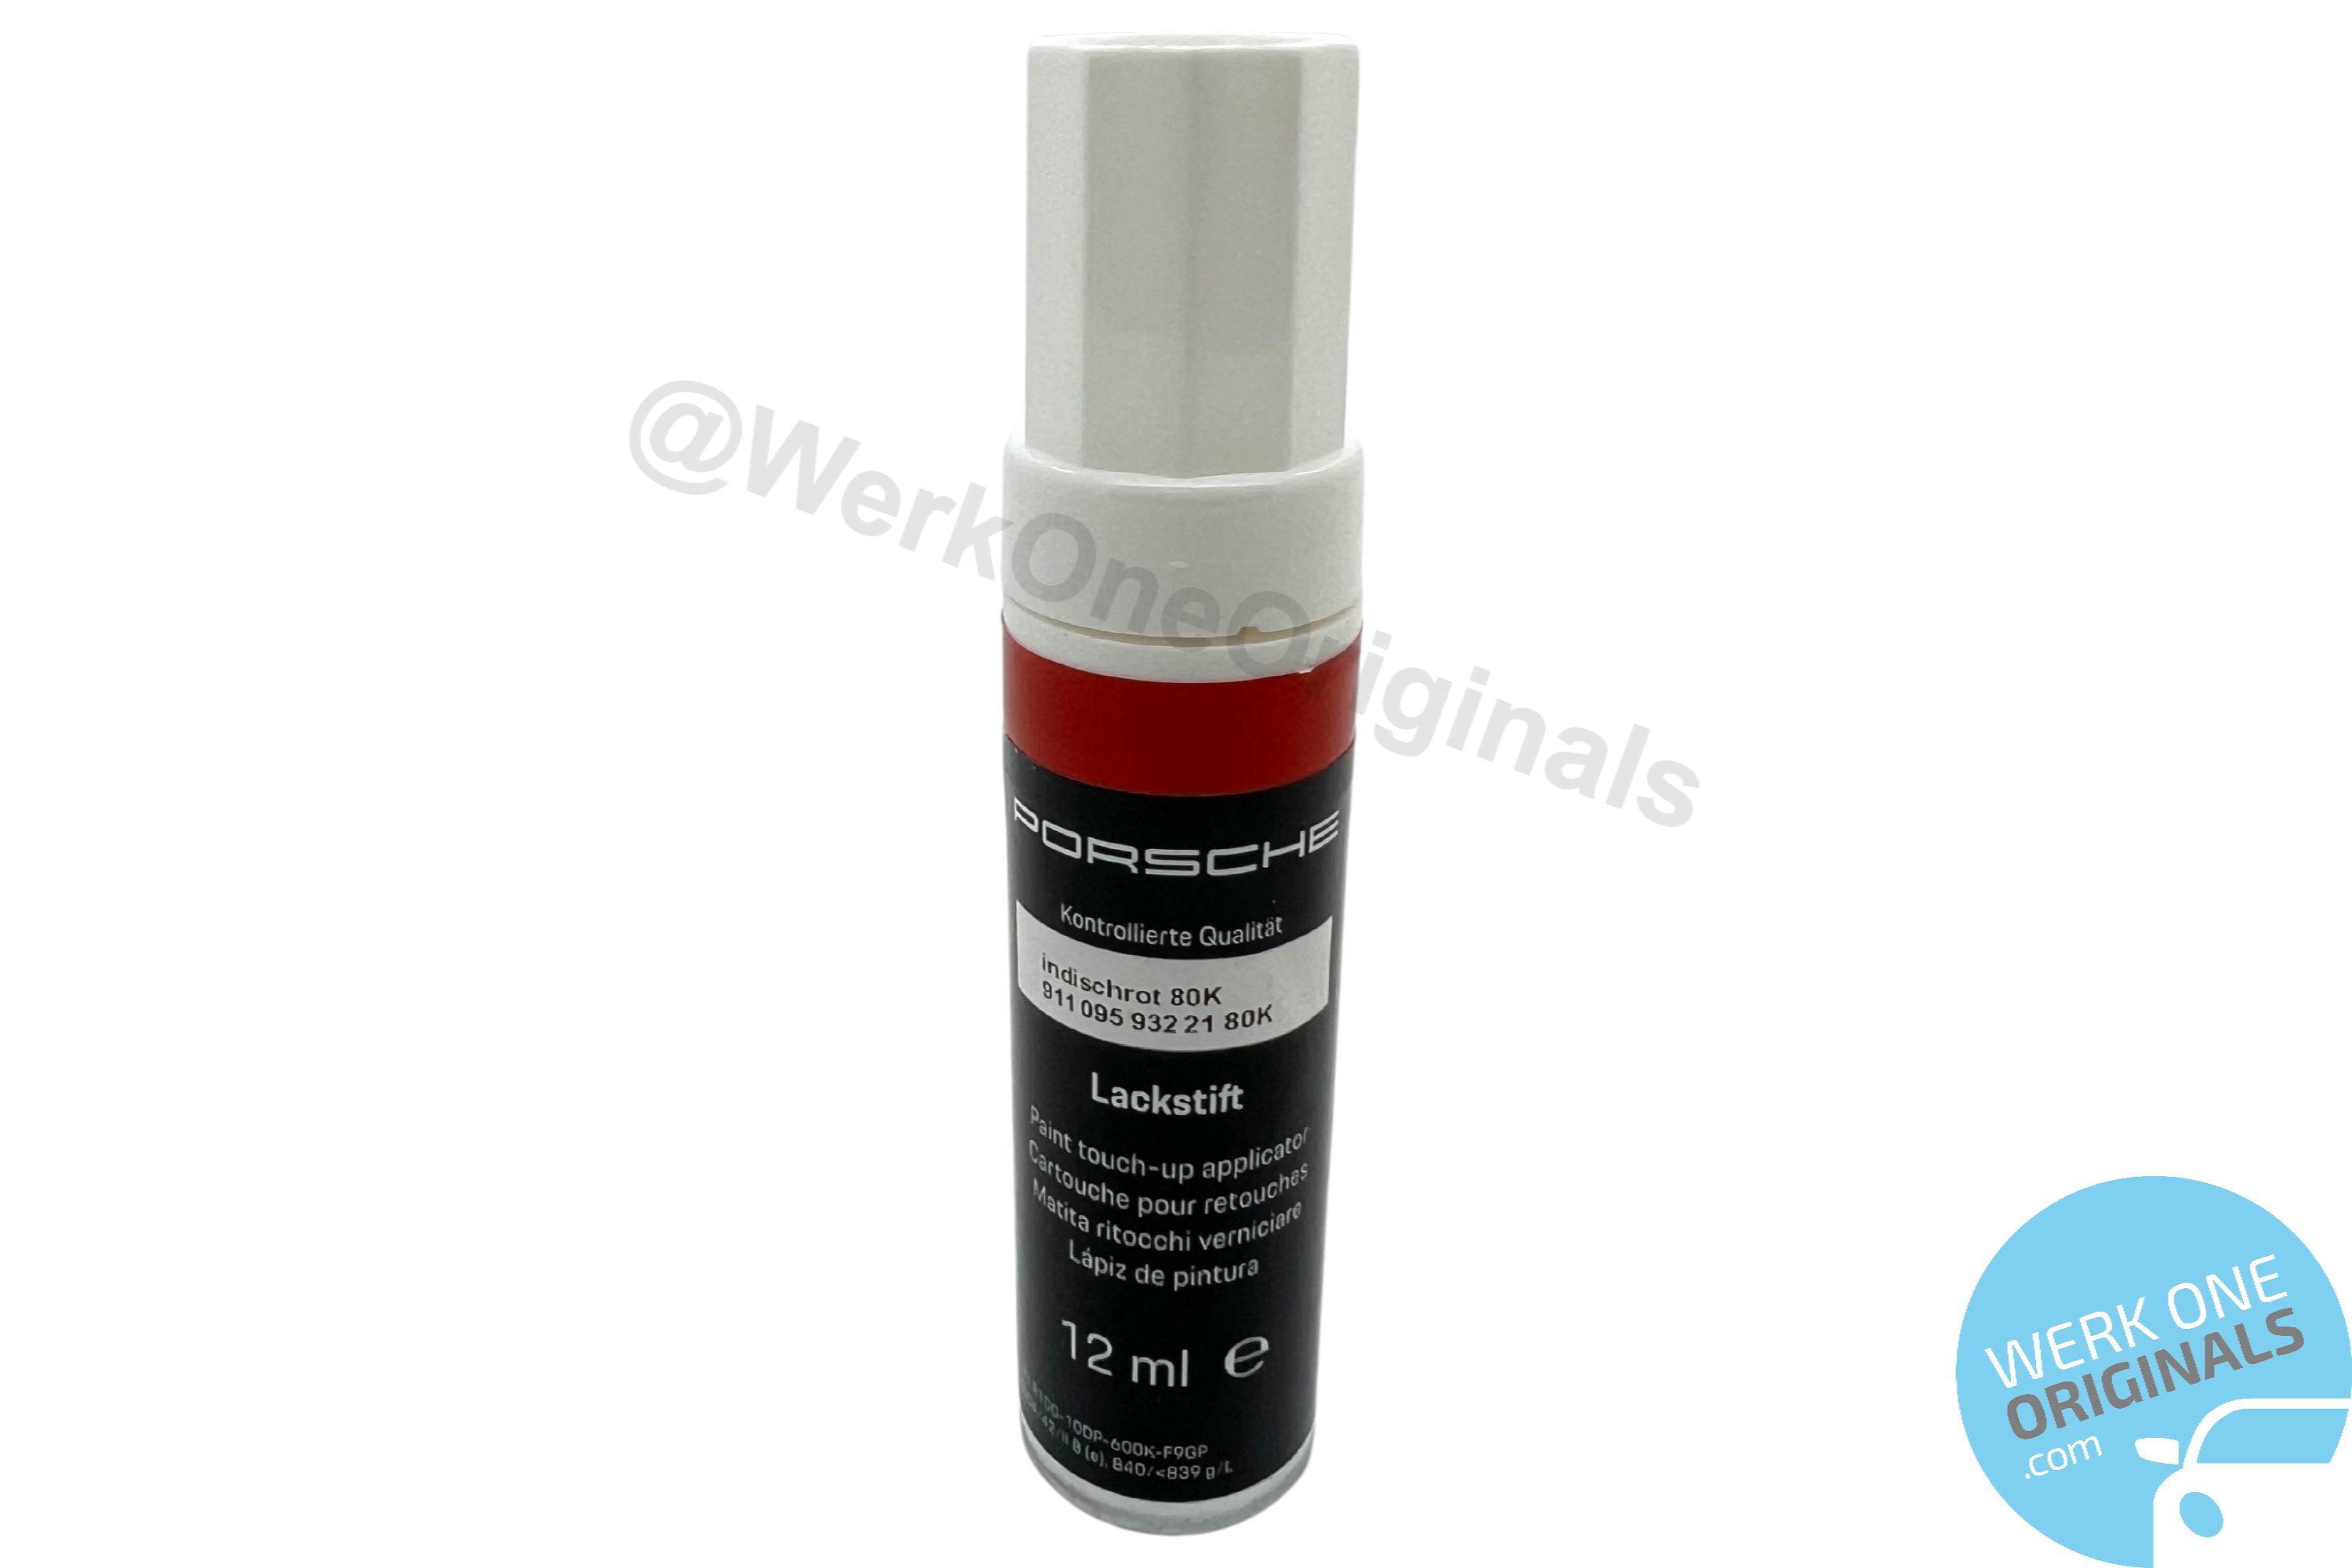 Porsche Official Touch Up Paint in Guards Red (Indischrot 80K)